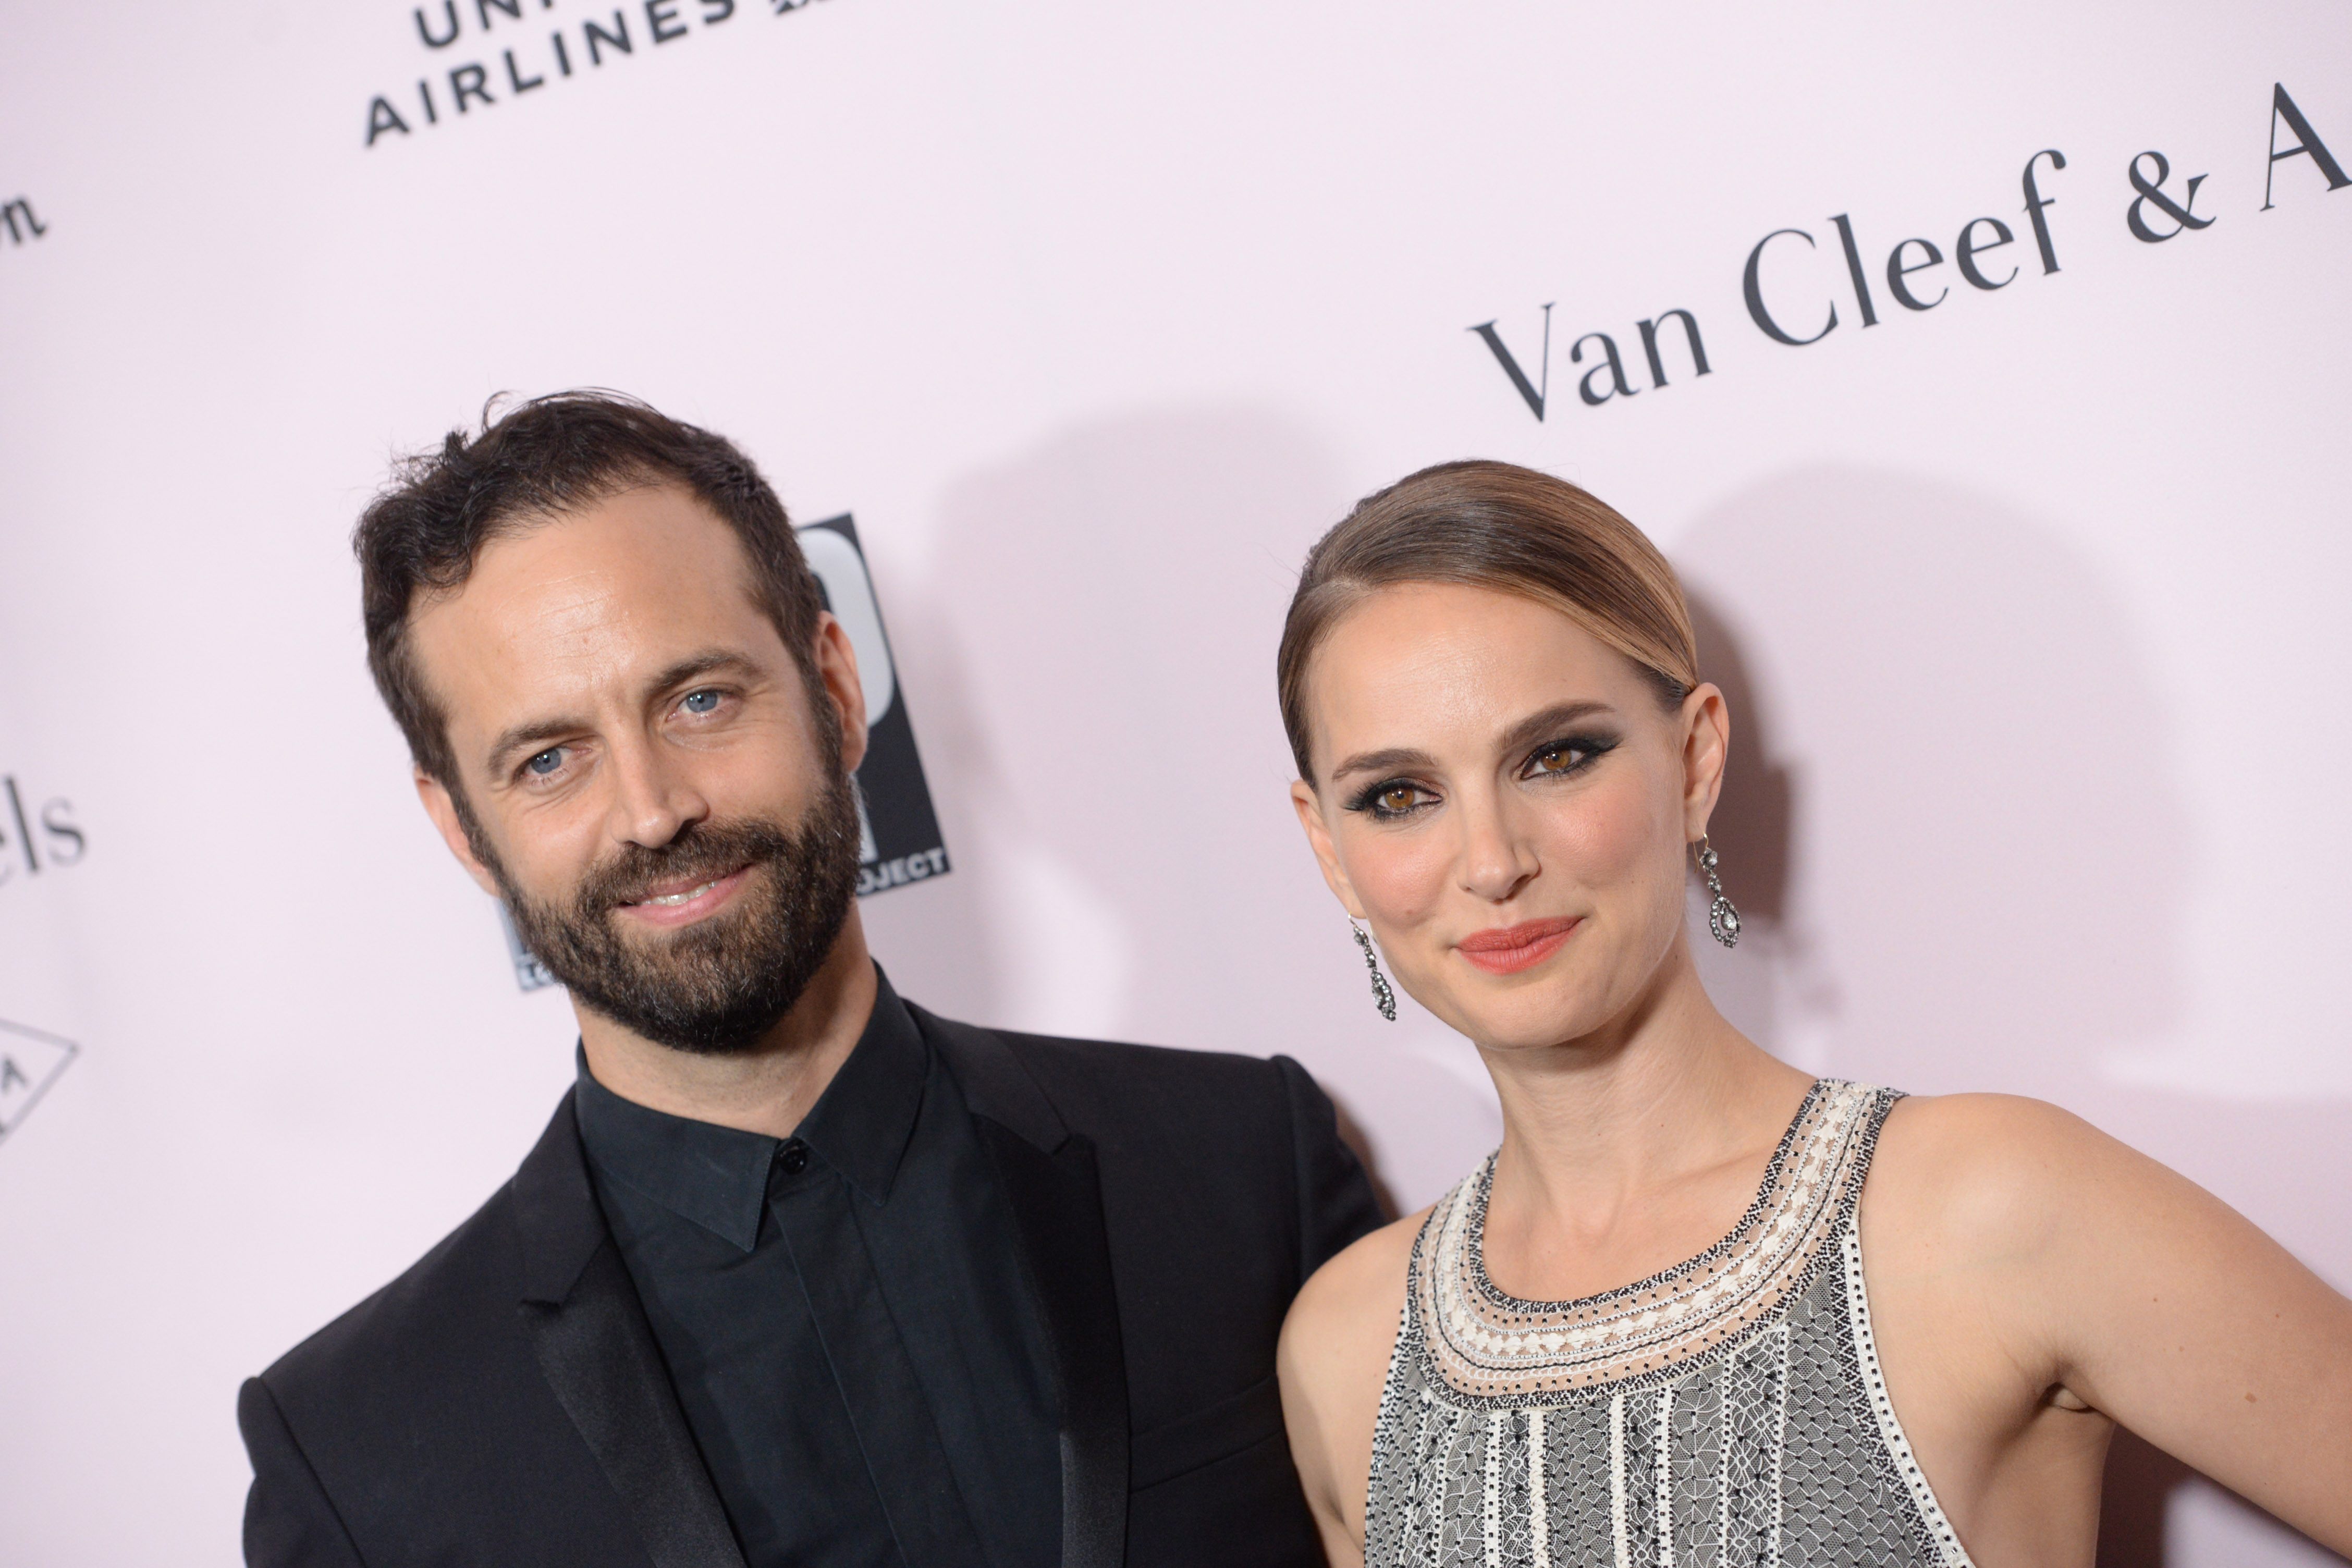 Benjamin Millepied and Natalie Portman at the LA Dance Project's 2019 Fundraising Gala | Source: Getty Images